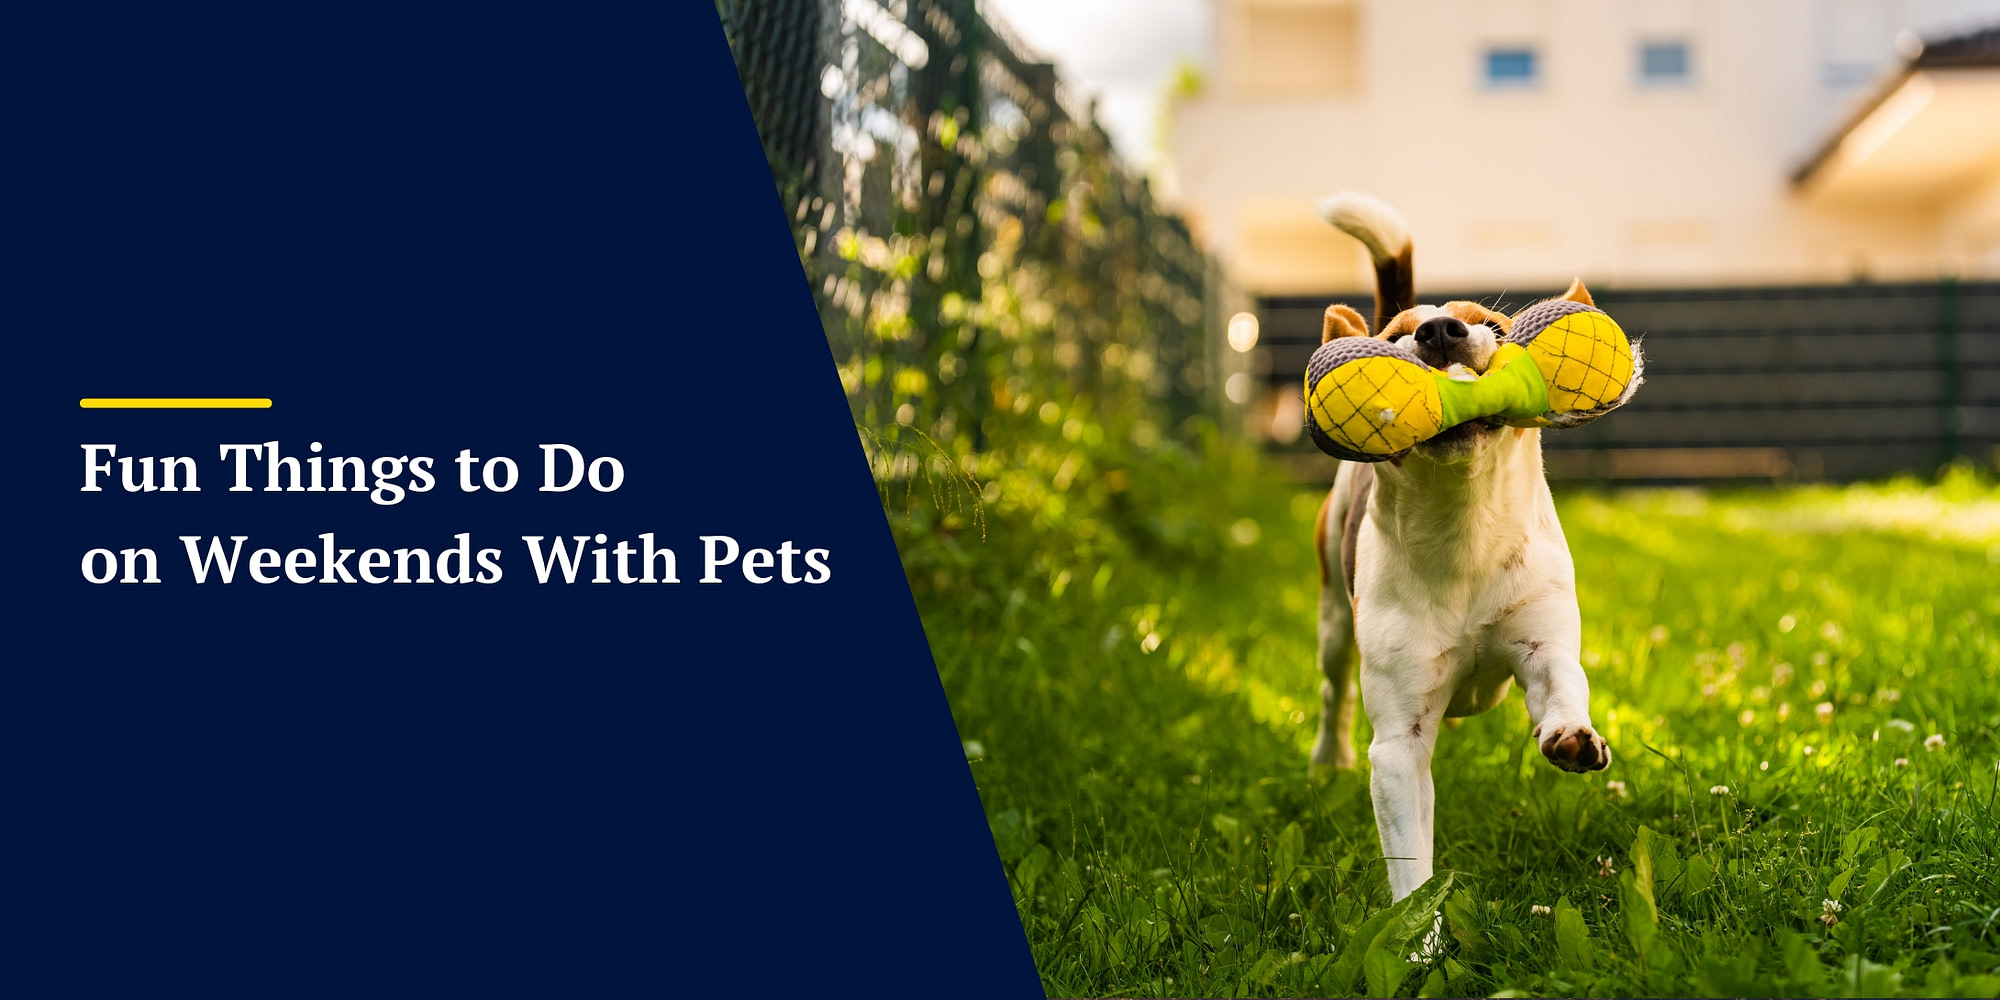 Fun Things to Do
on Weekends With Pets